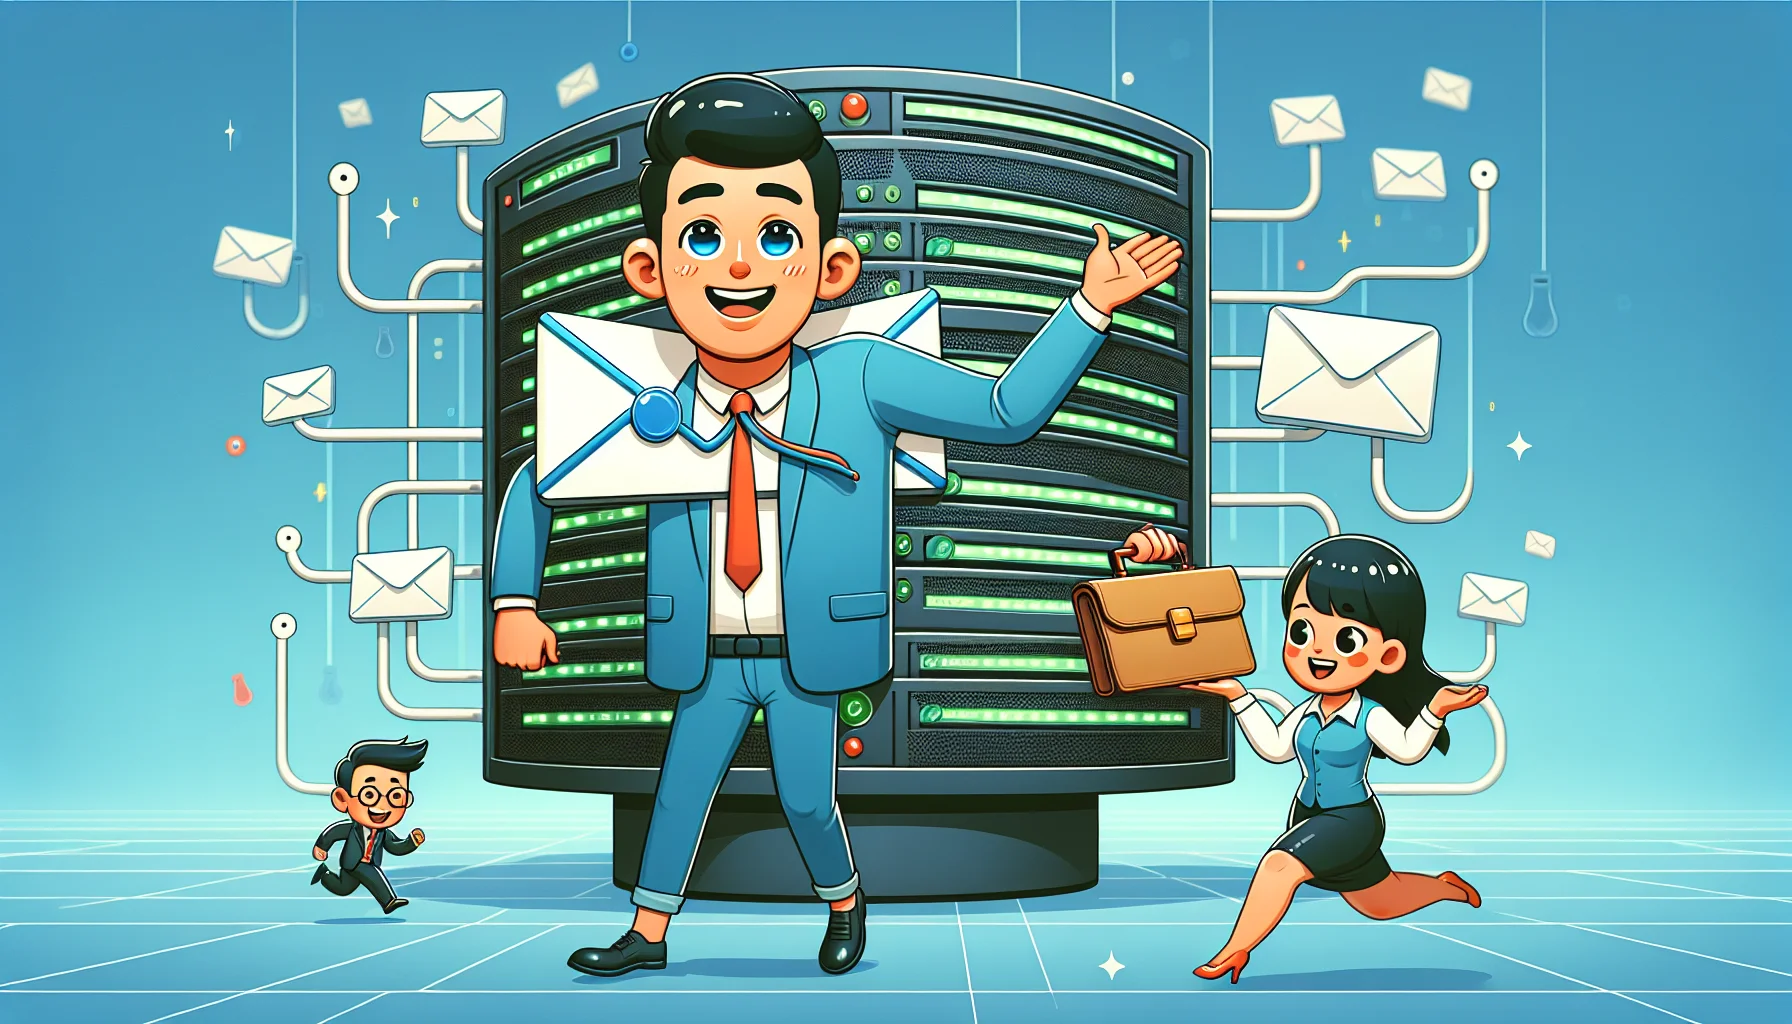 Create an image depicting a humorous, personified email with briefcase and tie, a Caucasian male, representing best email hosting for small businesses. He's cheerfully interacting with a comical, animate web server, an Asian female, represented as a supporting pillar with numerous smaller pillars (signifying web hosting). She is equipped with multiple arms to manage various functions simultaneously. They are in a lively, digitally themed office space, with tiny files and data packets floating around, symbolising the digital nature of their operations. Both characters appear confident and efficient, giving the impression of a robust, reliable service.